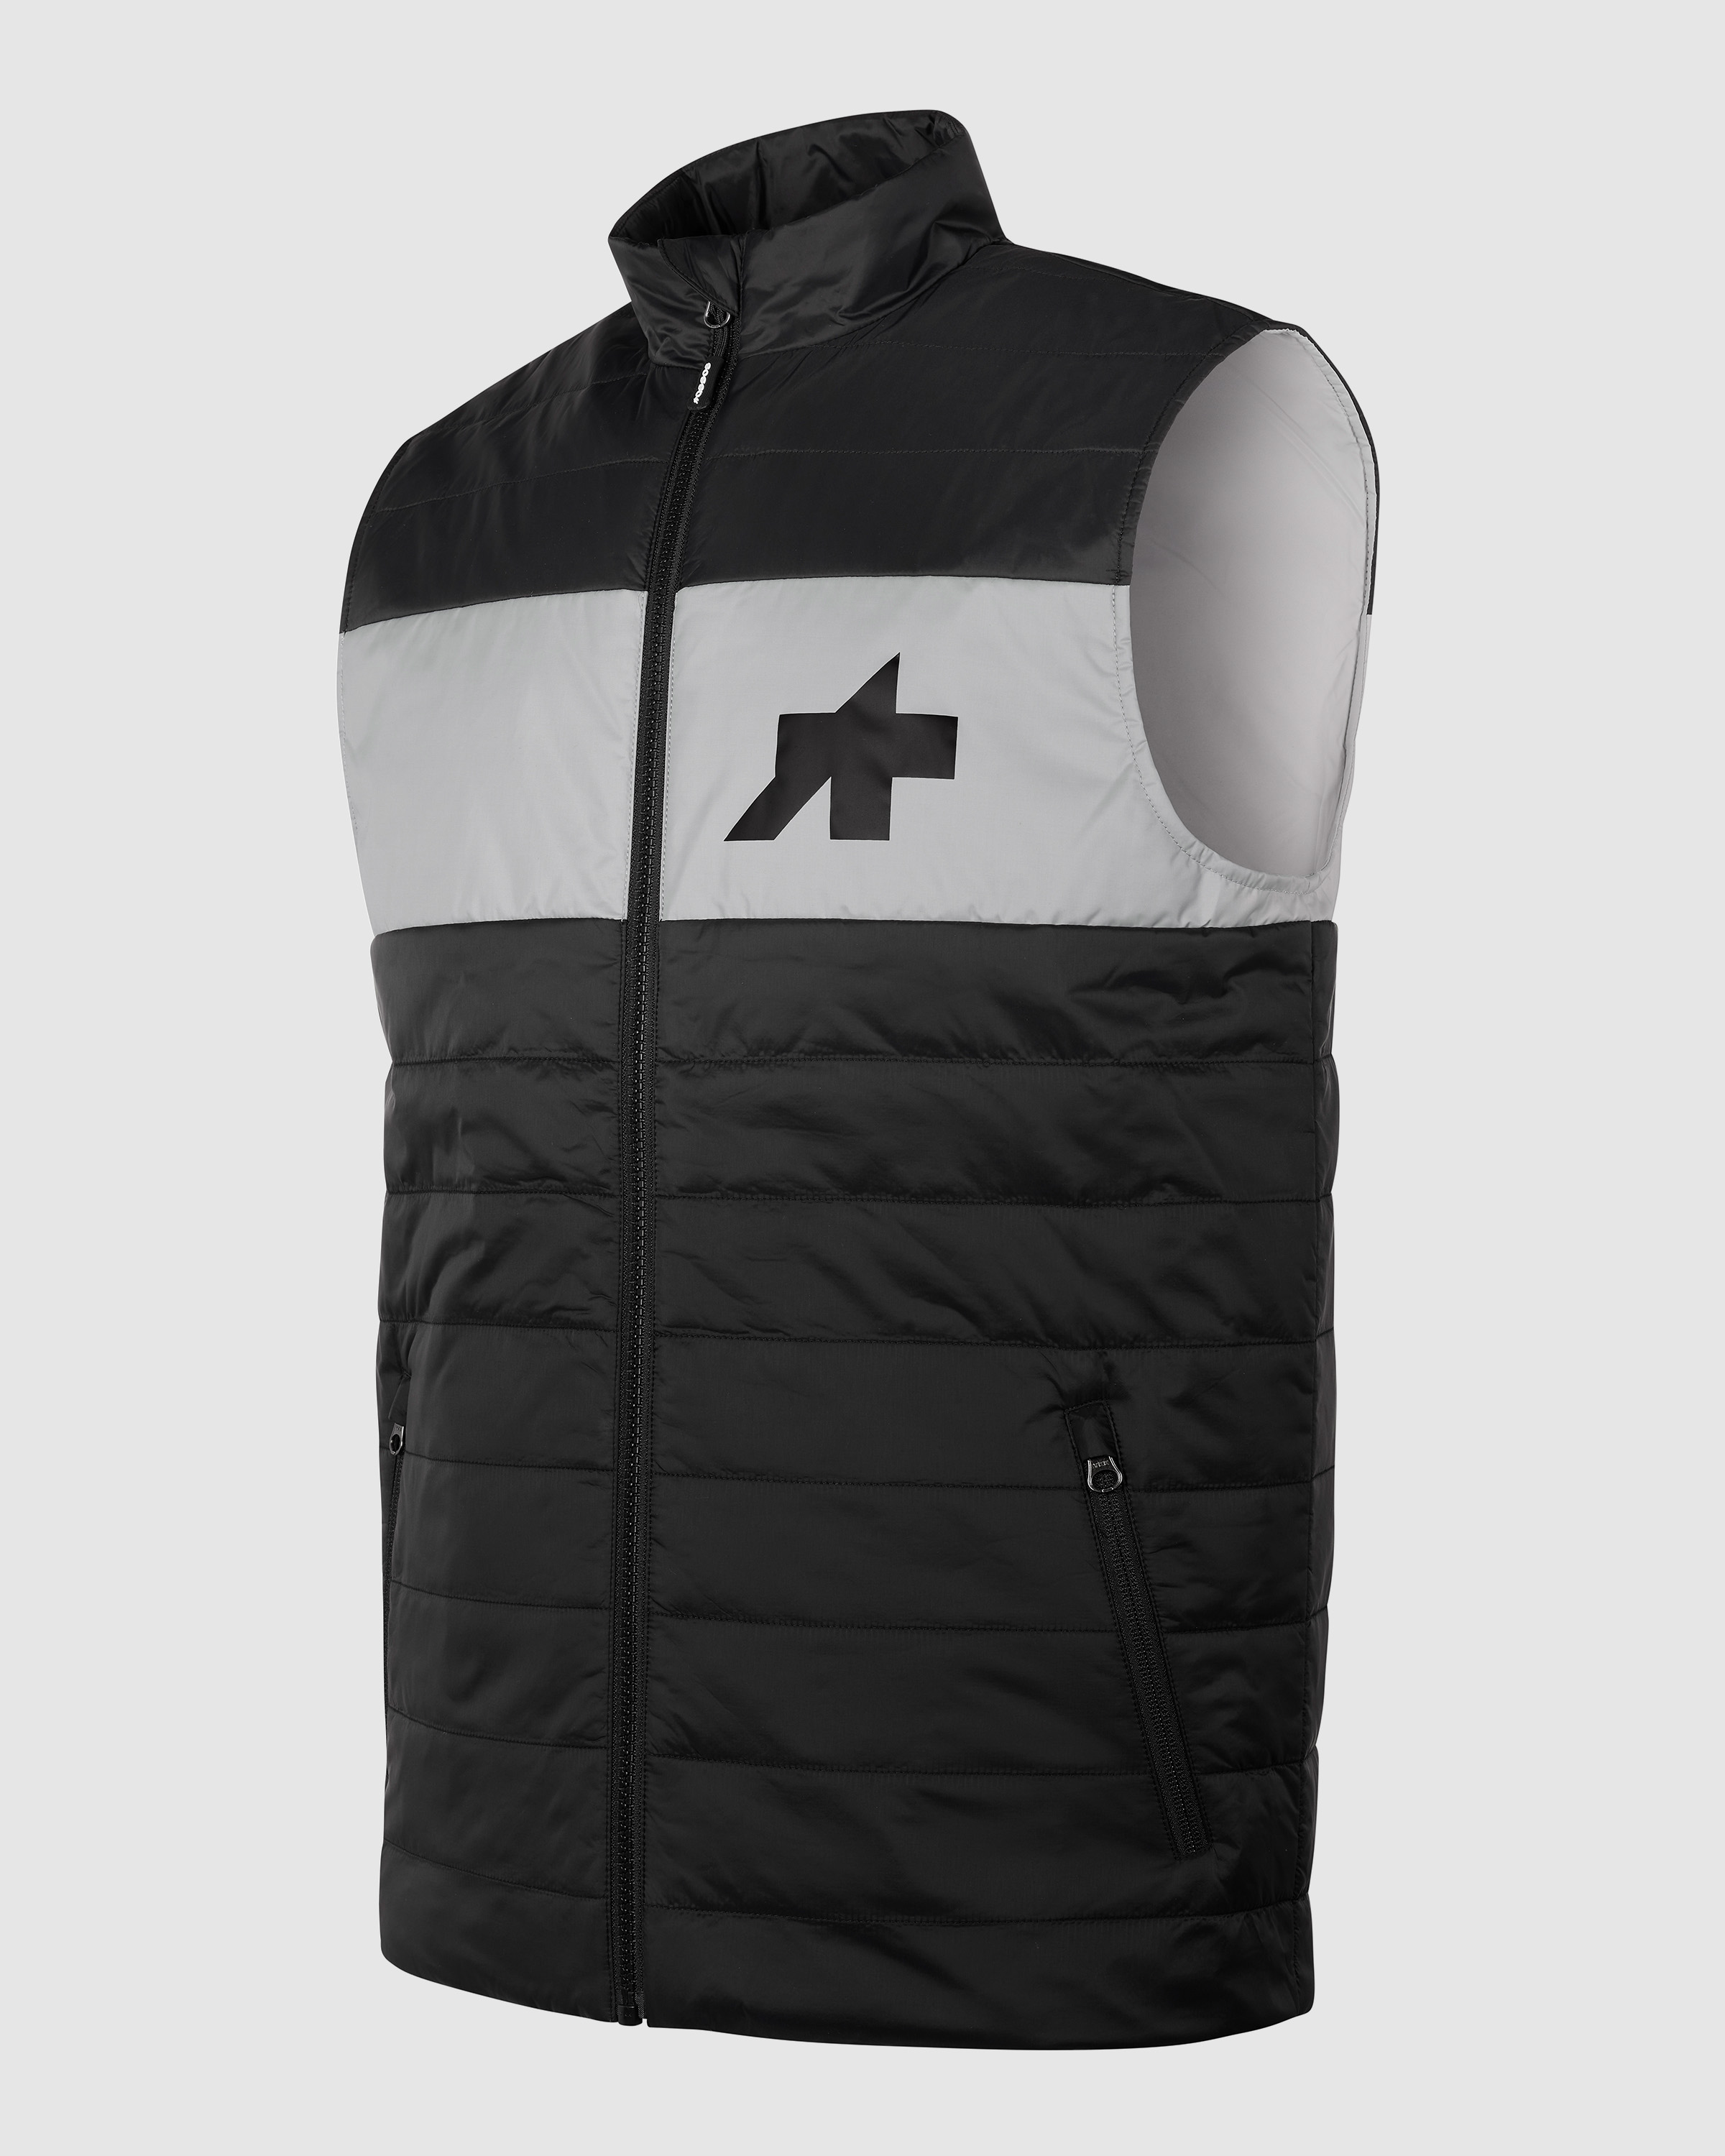 SIGNATURE THERMO VEST - ASSOS Of Switzerland - Official Outlet